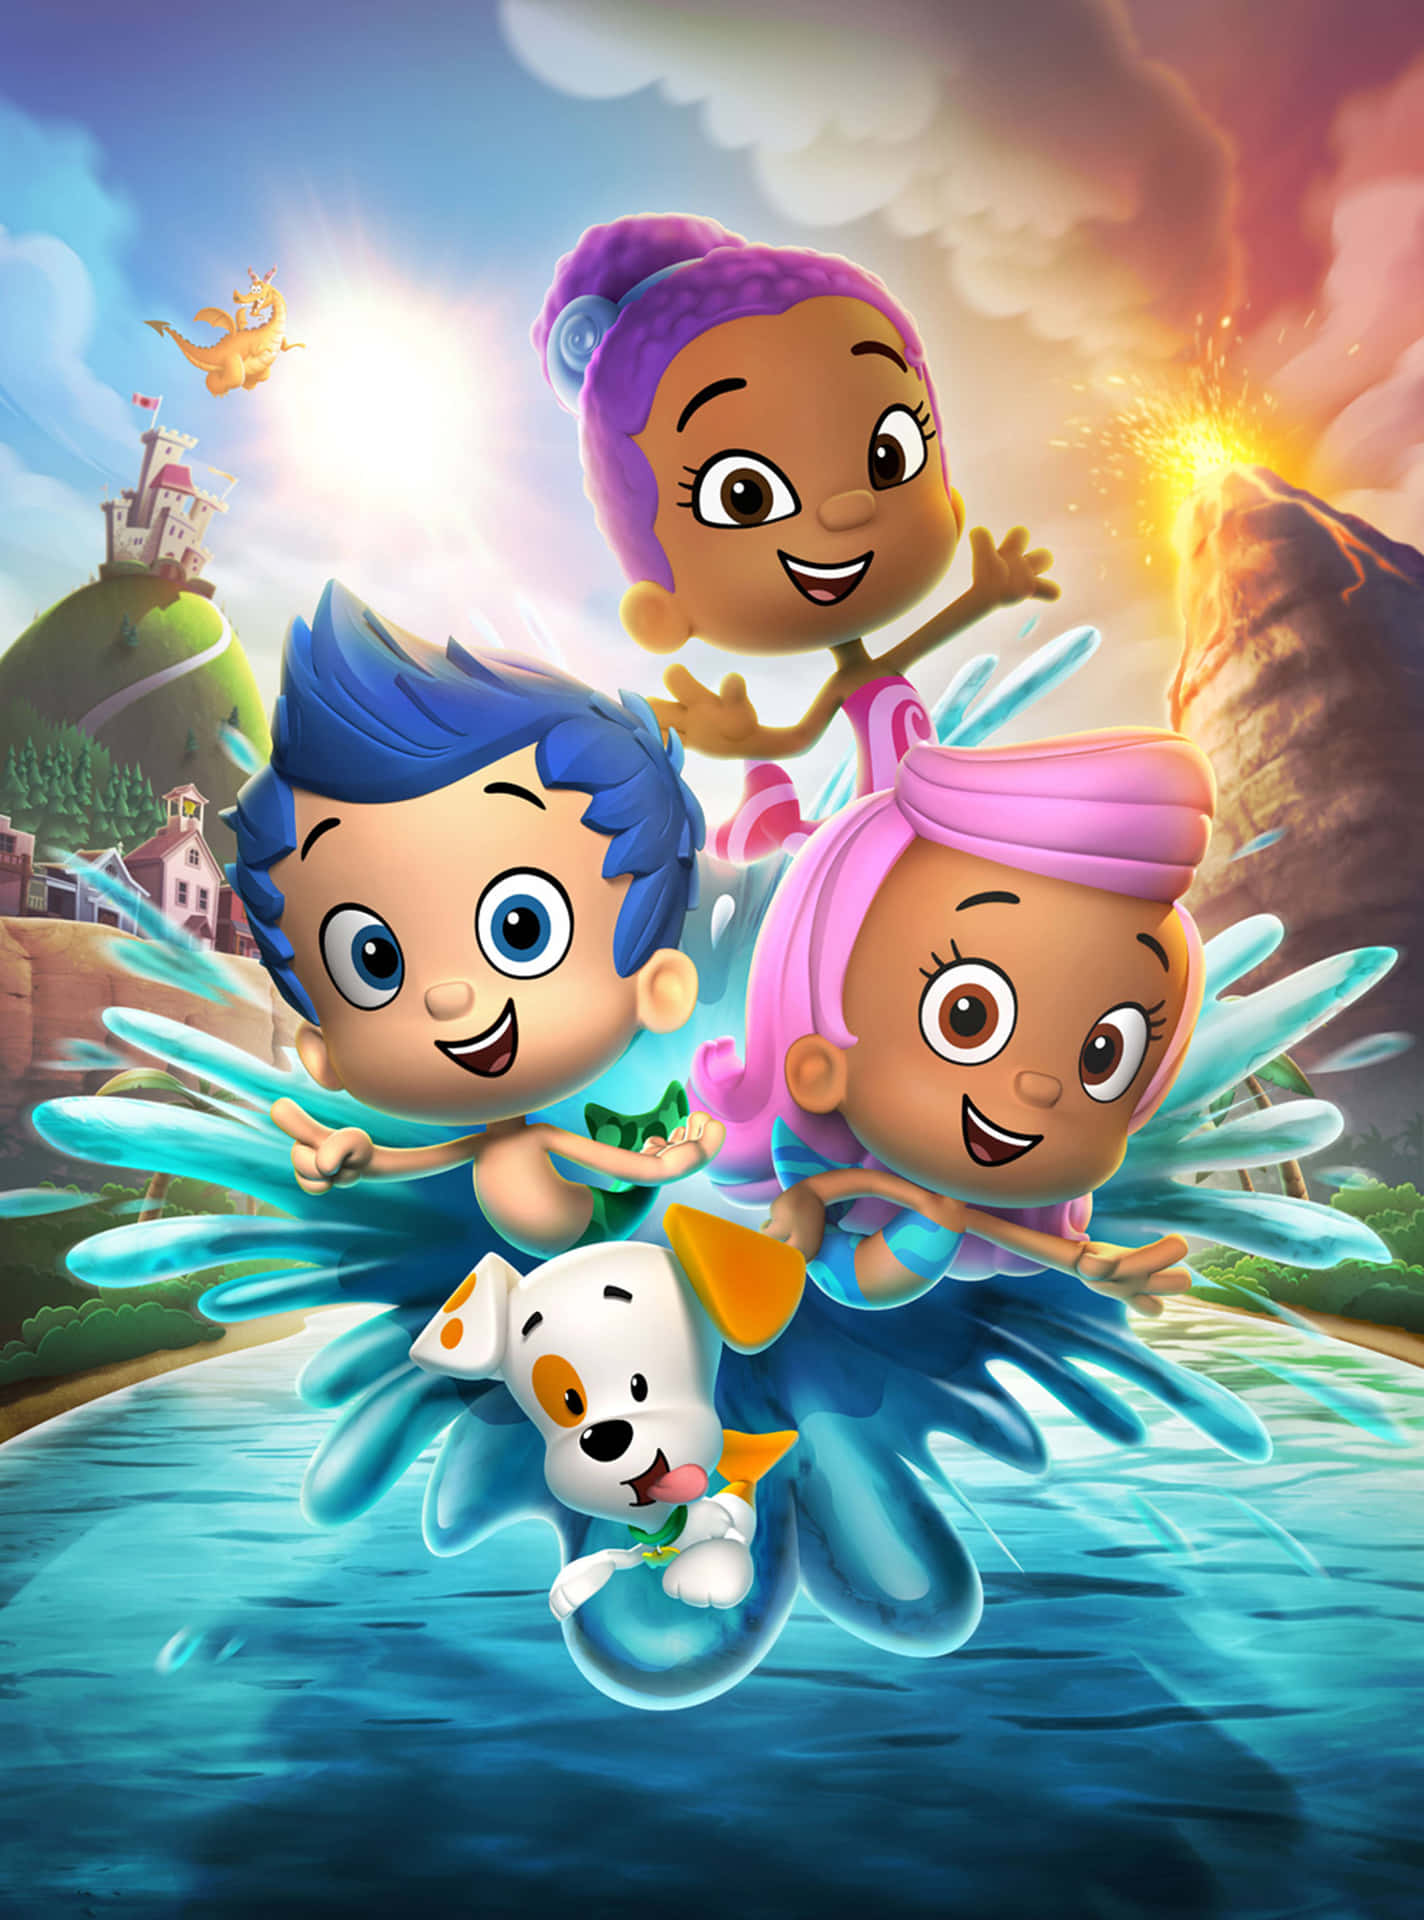 Join the Bubble Guppies for Underwater Adventure